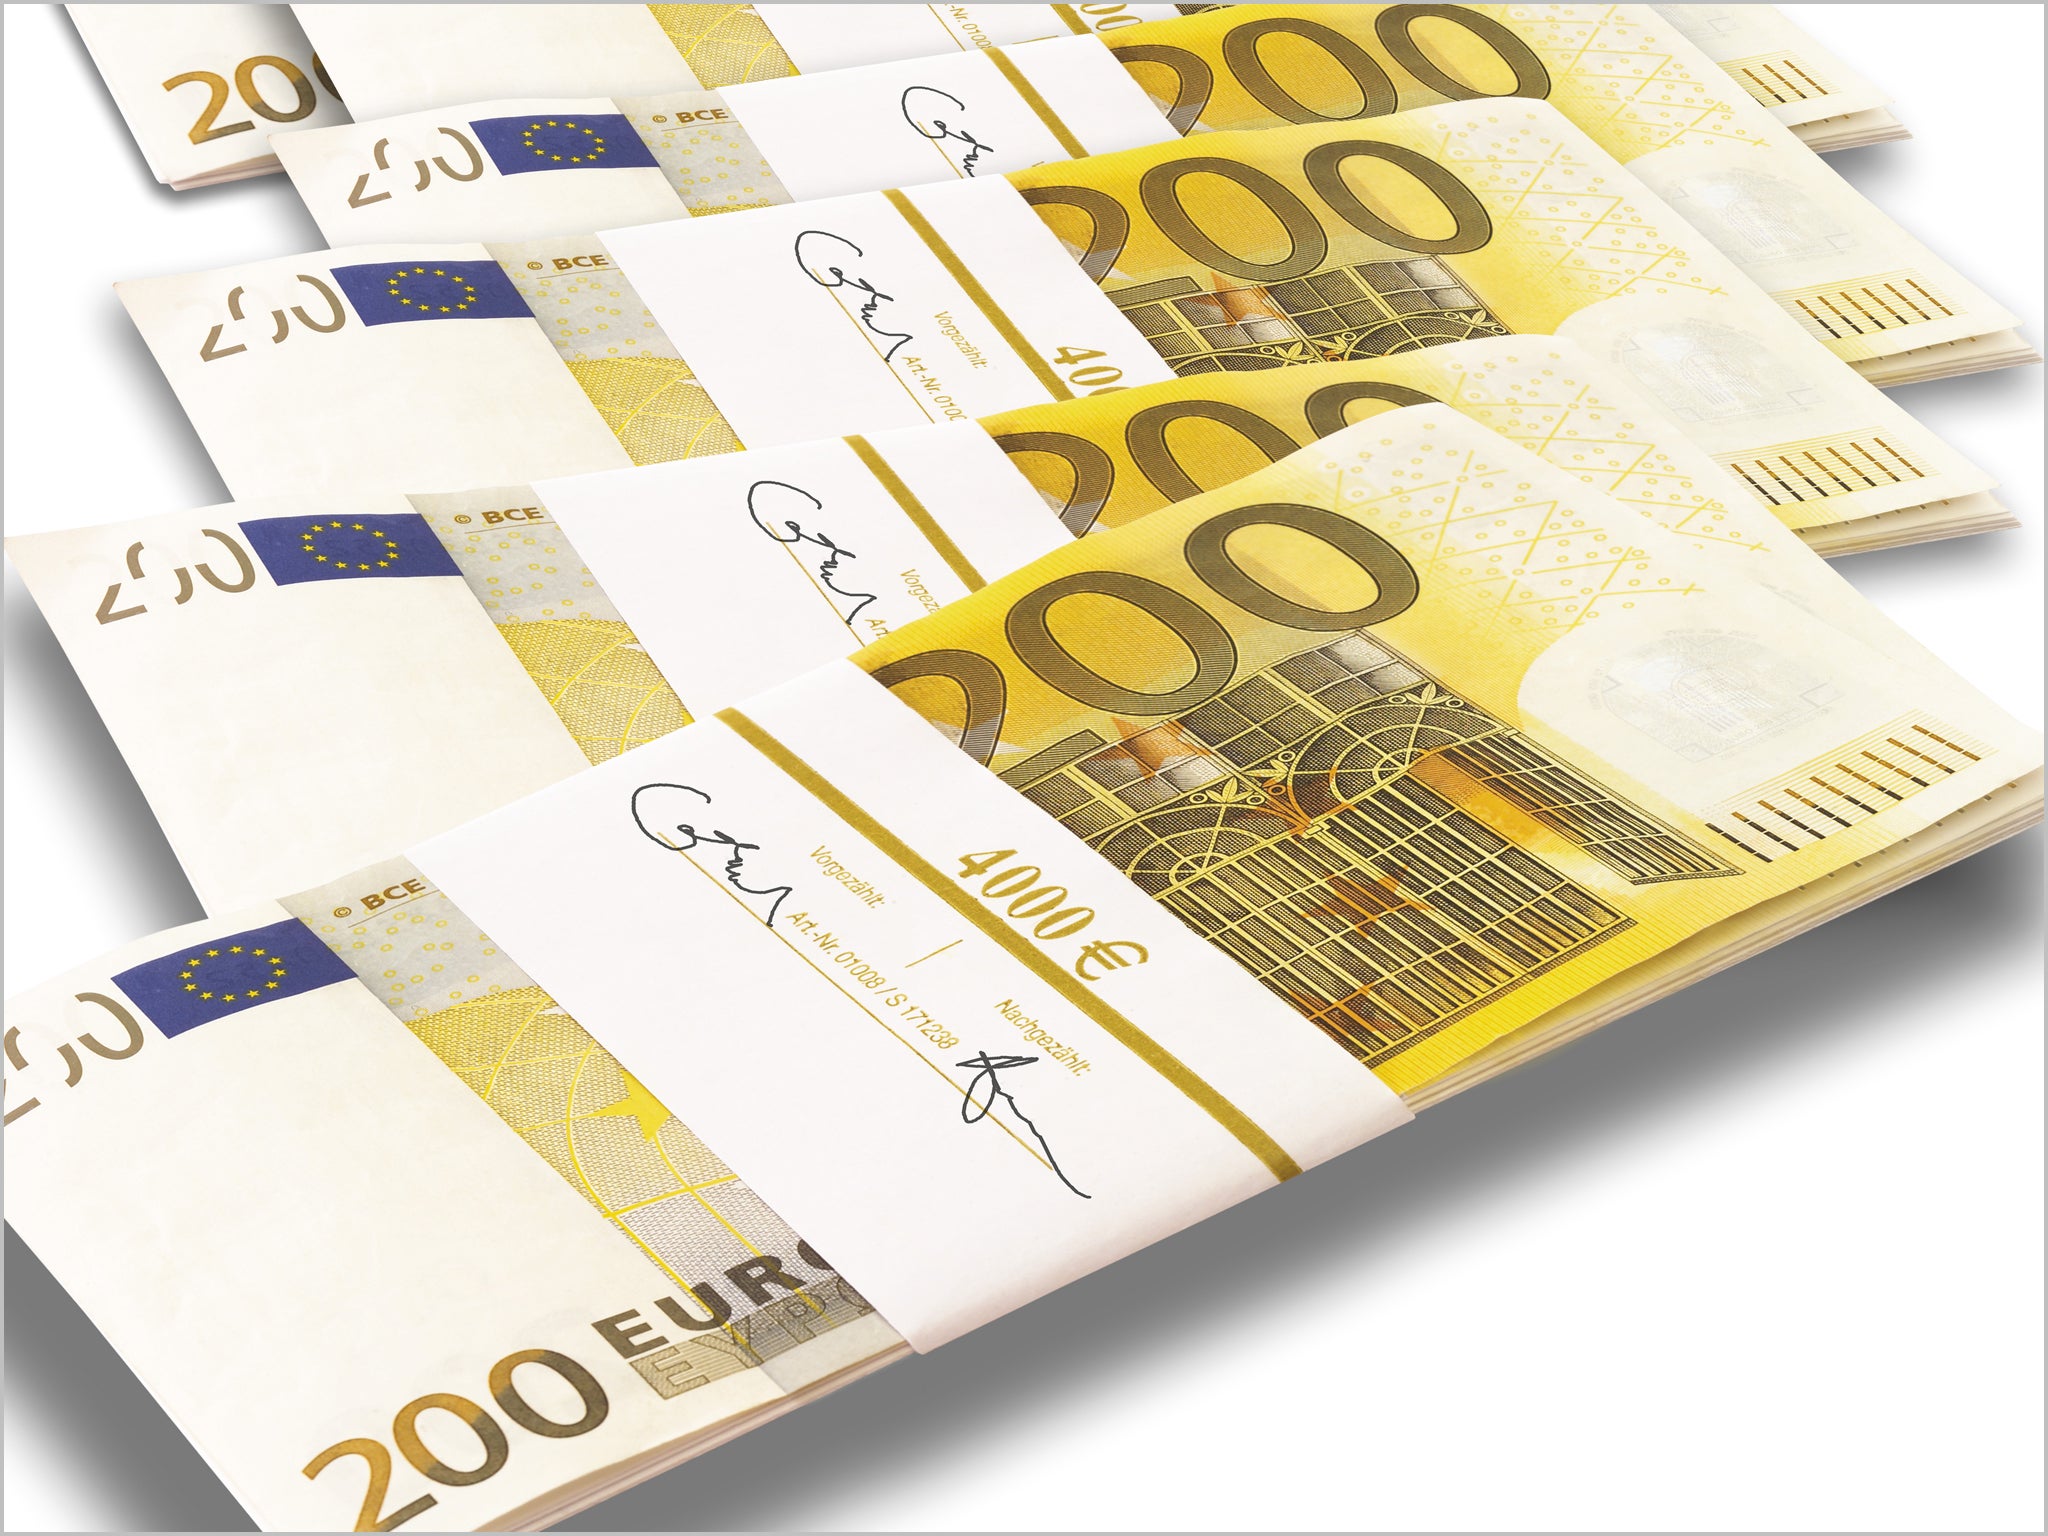 The €200 note became a favourite for money-launderers